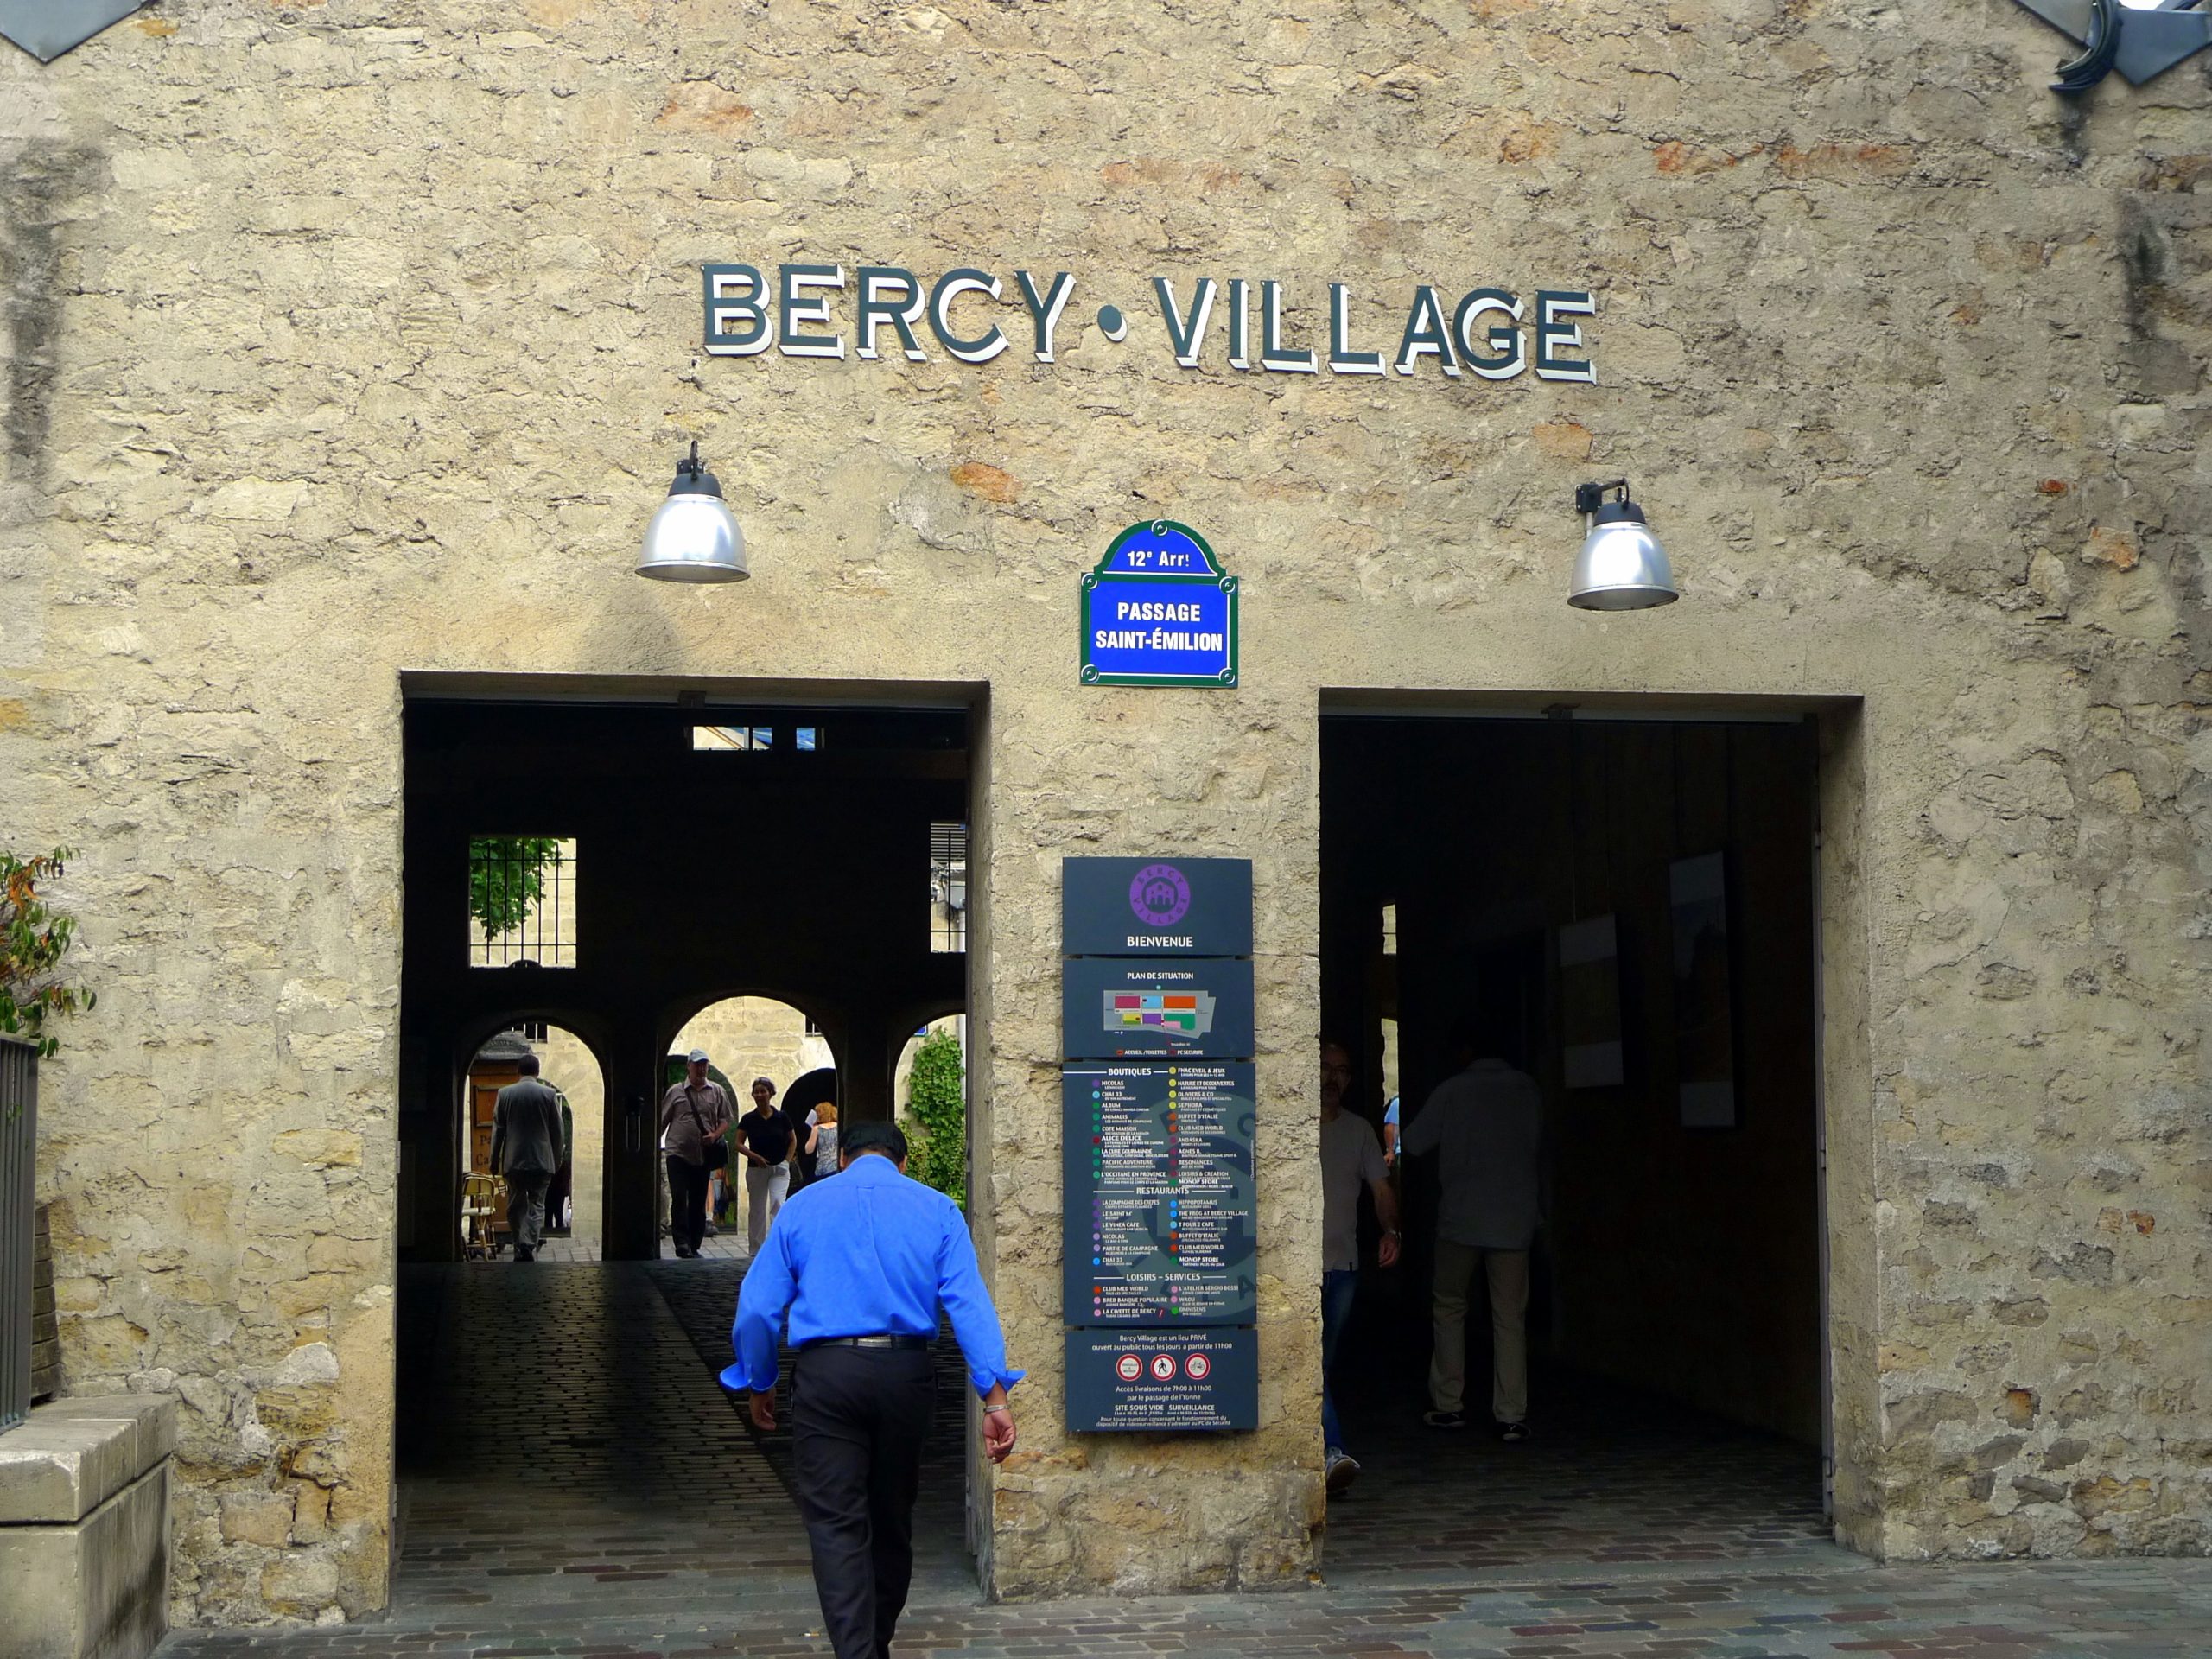 Bercy Village - Things To Do at Bercy Arena Paris Olympics 2024 | Top Attractions, Night Life, Restaurants